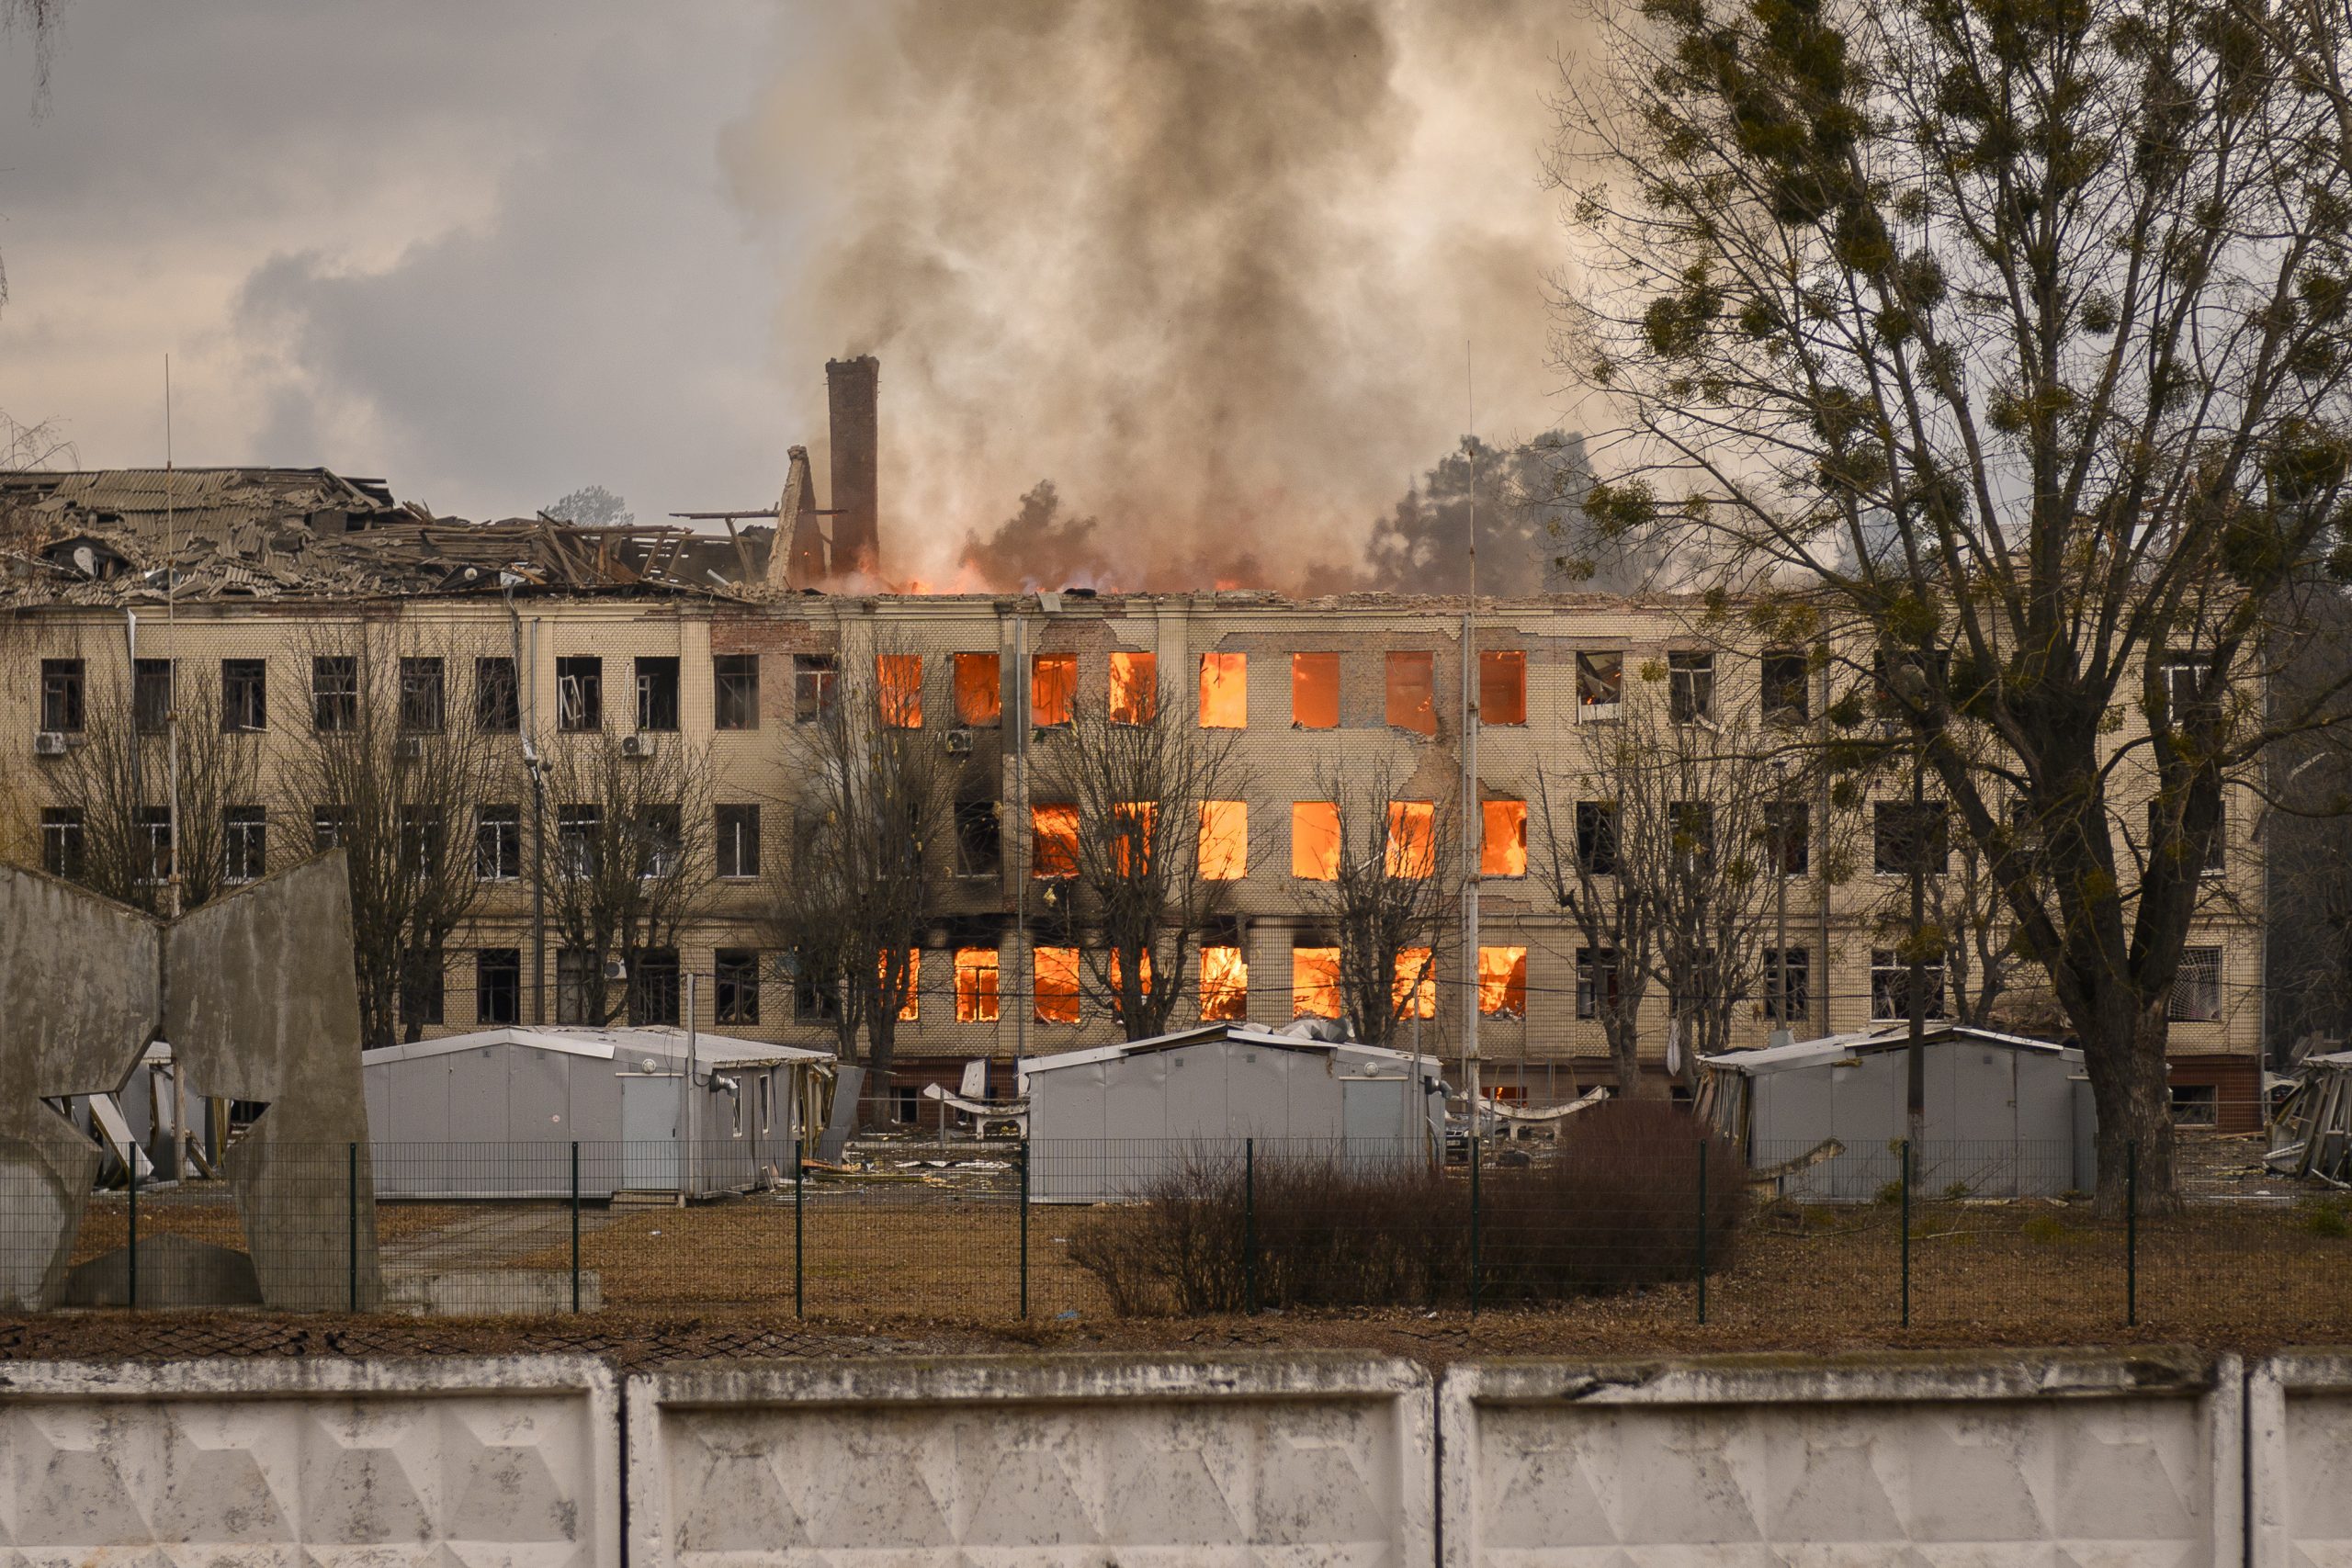 Photo of a building in Brovary burns after being hit by a Russian rocket 